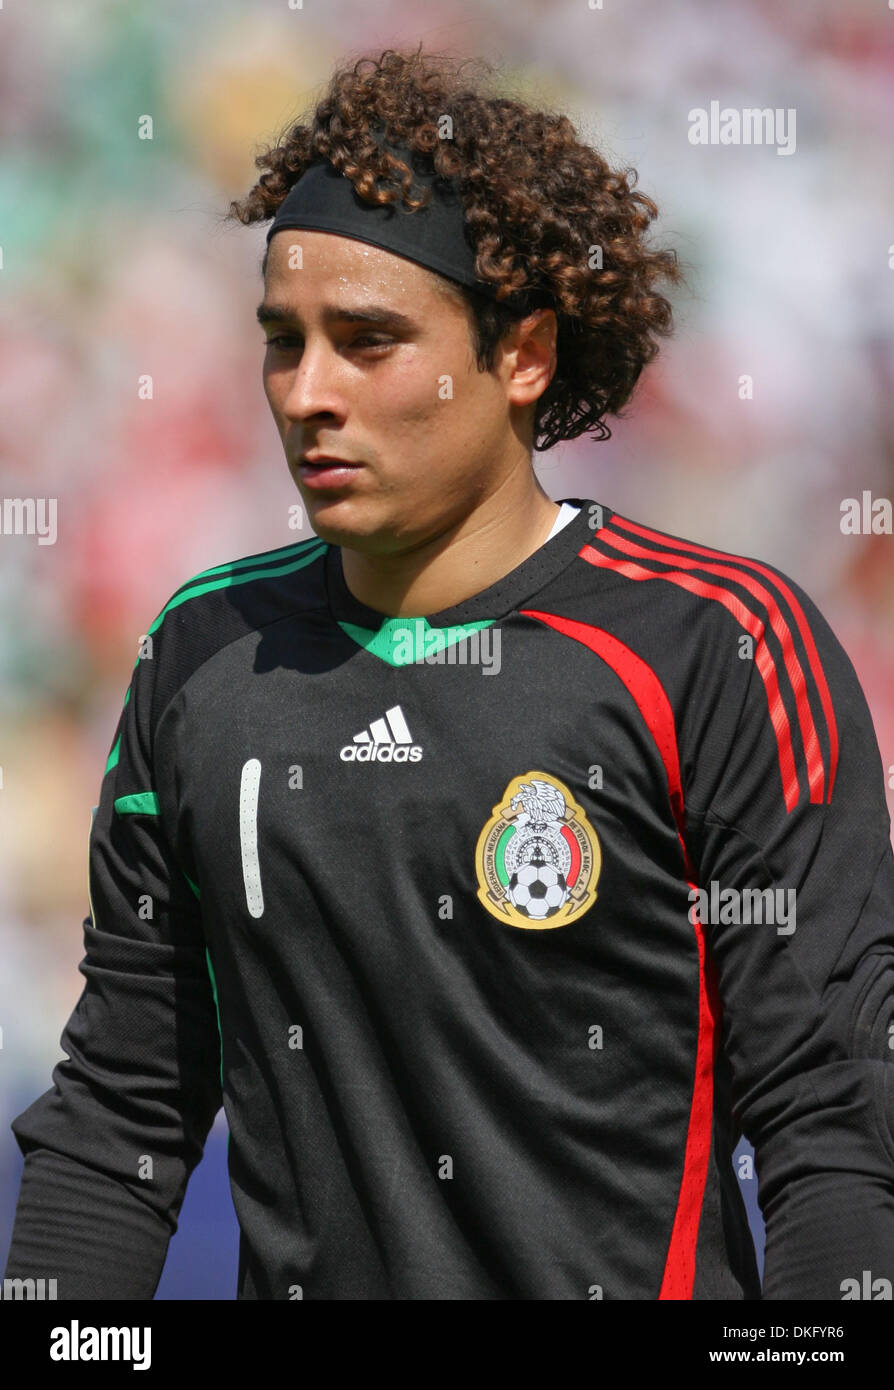 Jul 26, 2009 - East Rutherford, New York, USA - GUILLERMO OCHOA Keeper for Mexico. Mexico defeats USA 5-0 in the Concacaf Gold Cup Final at Giants Stadium, Rutherford NJ. (Credit Image: © Tony Gruppuso/Southcreek Global/ZUMA Press) Stock Photo